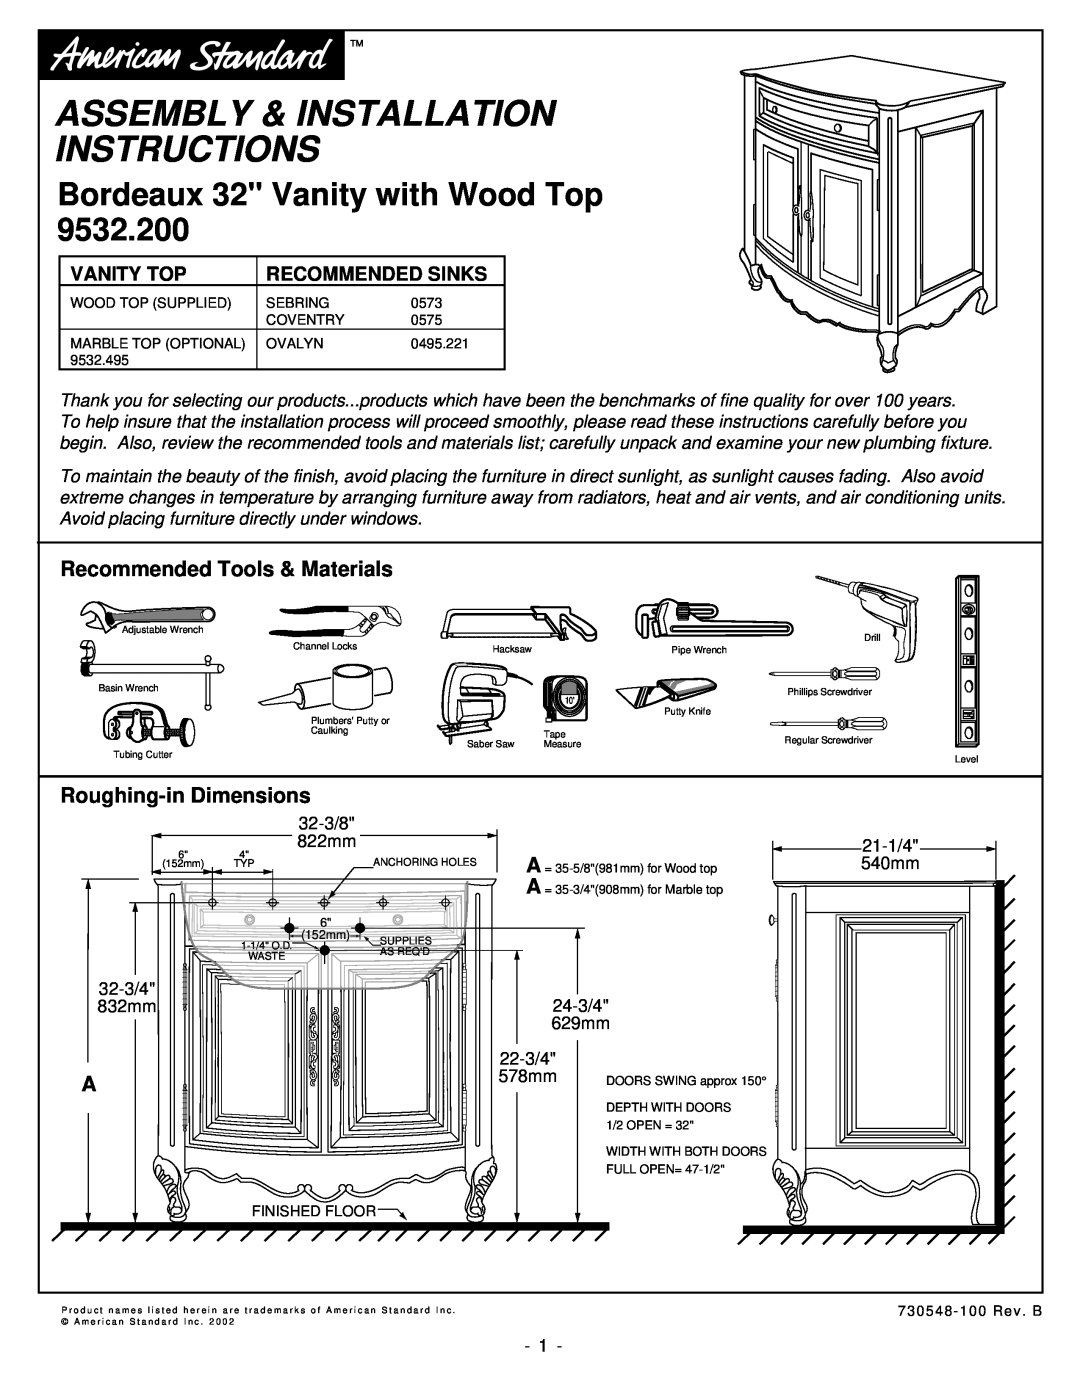 American Standard 9532.200 installation instructions Recommended Tools & Materials, Roughing-inDimensions, Vanity Top 